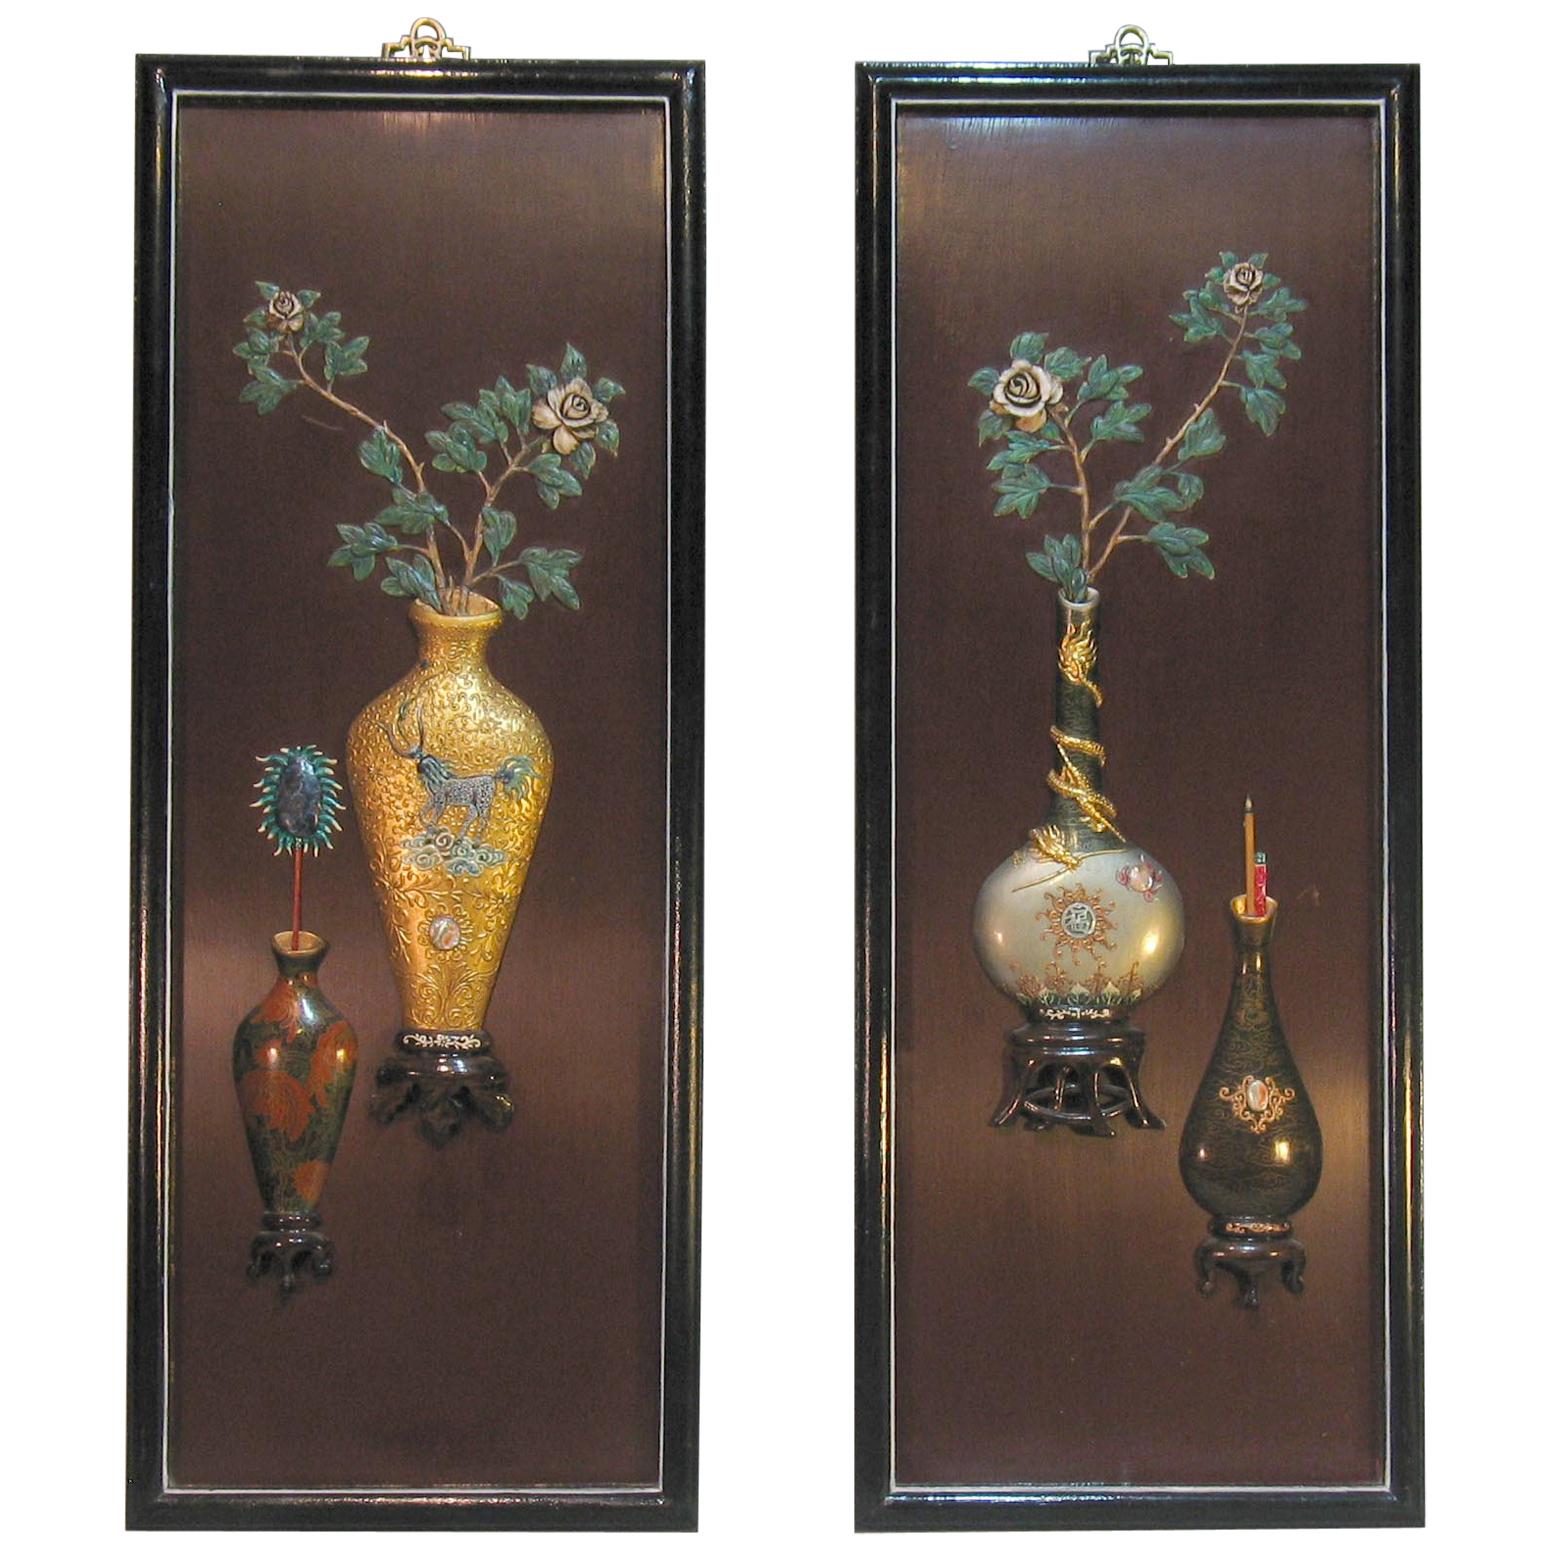 Pair of Chinese Export Decorative Wall Panels